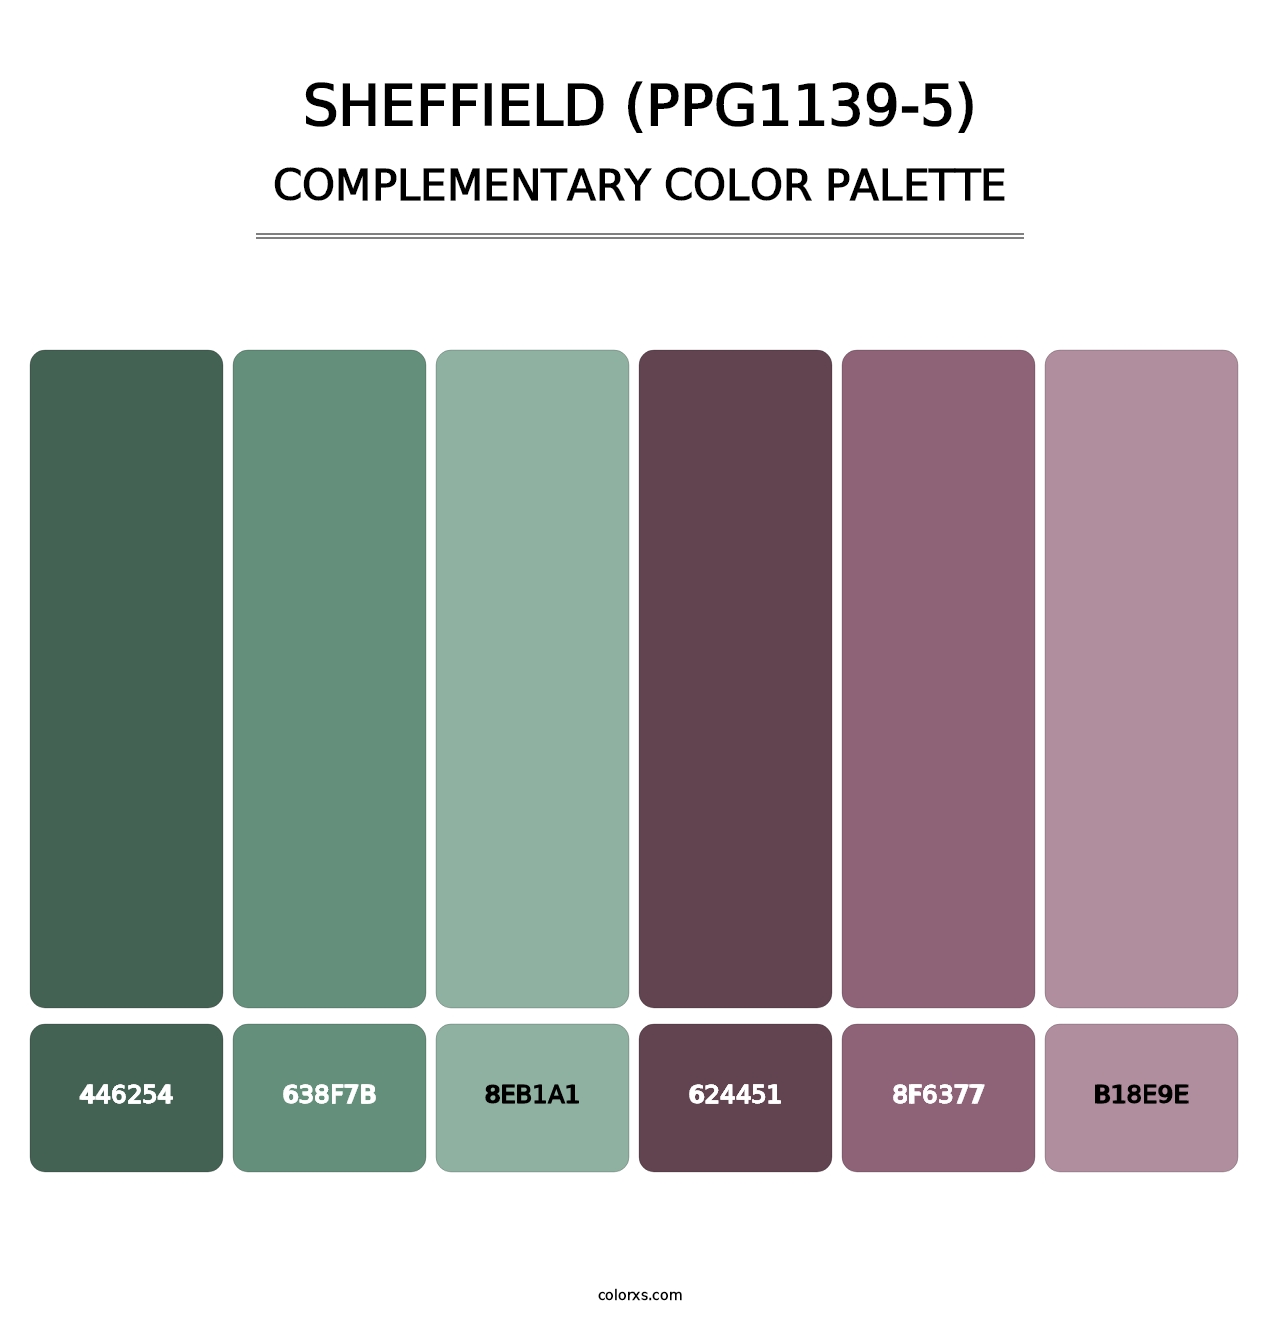 Sheffield (PPG1139-5) - Complementary Color Palette